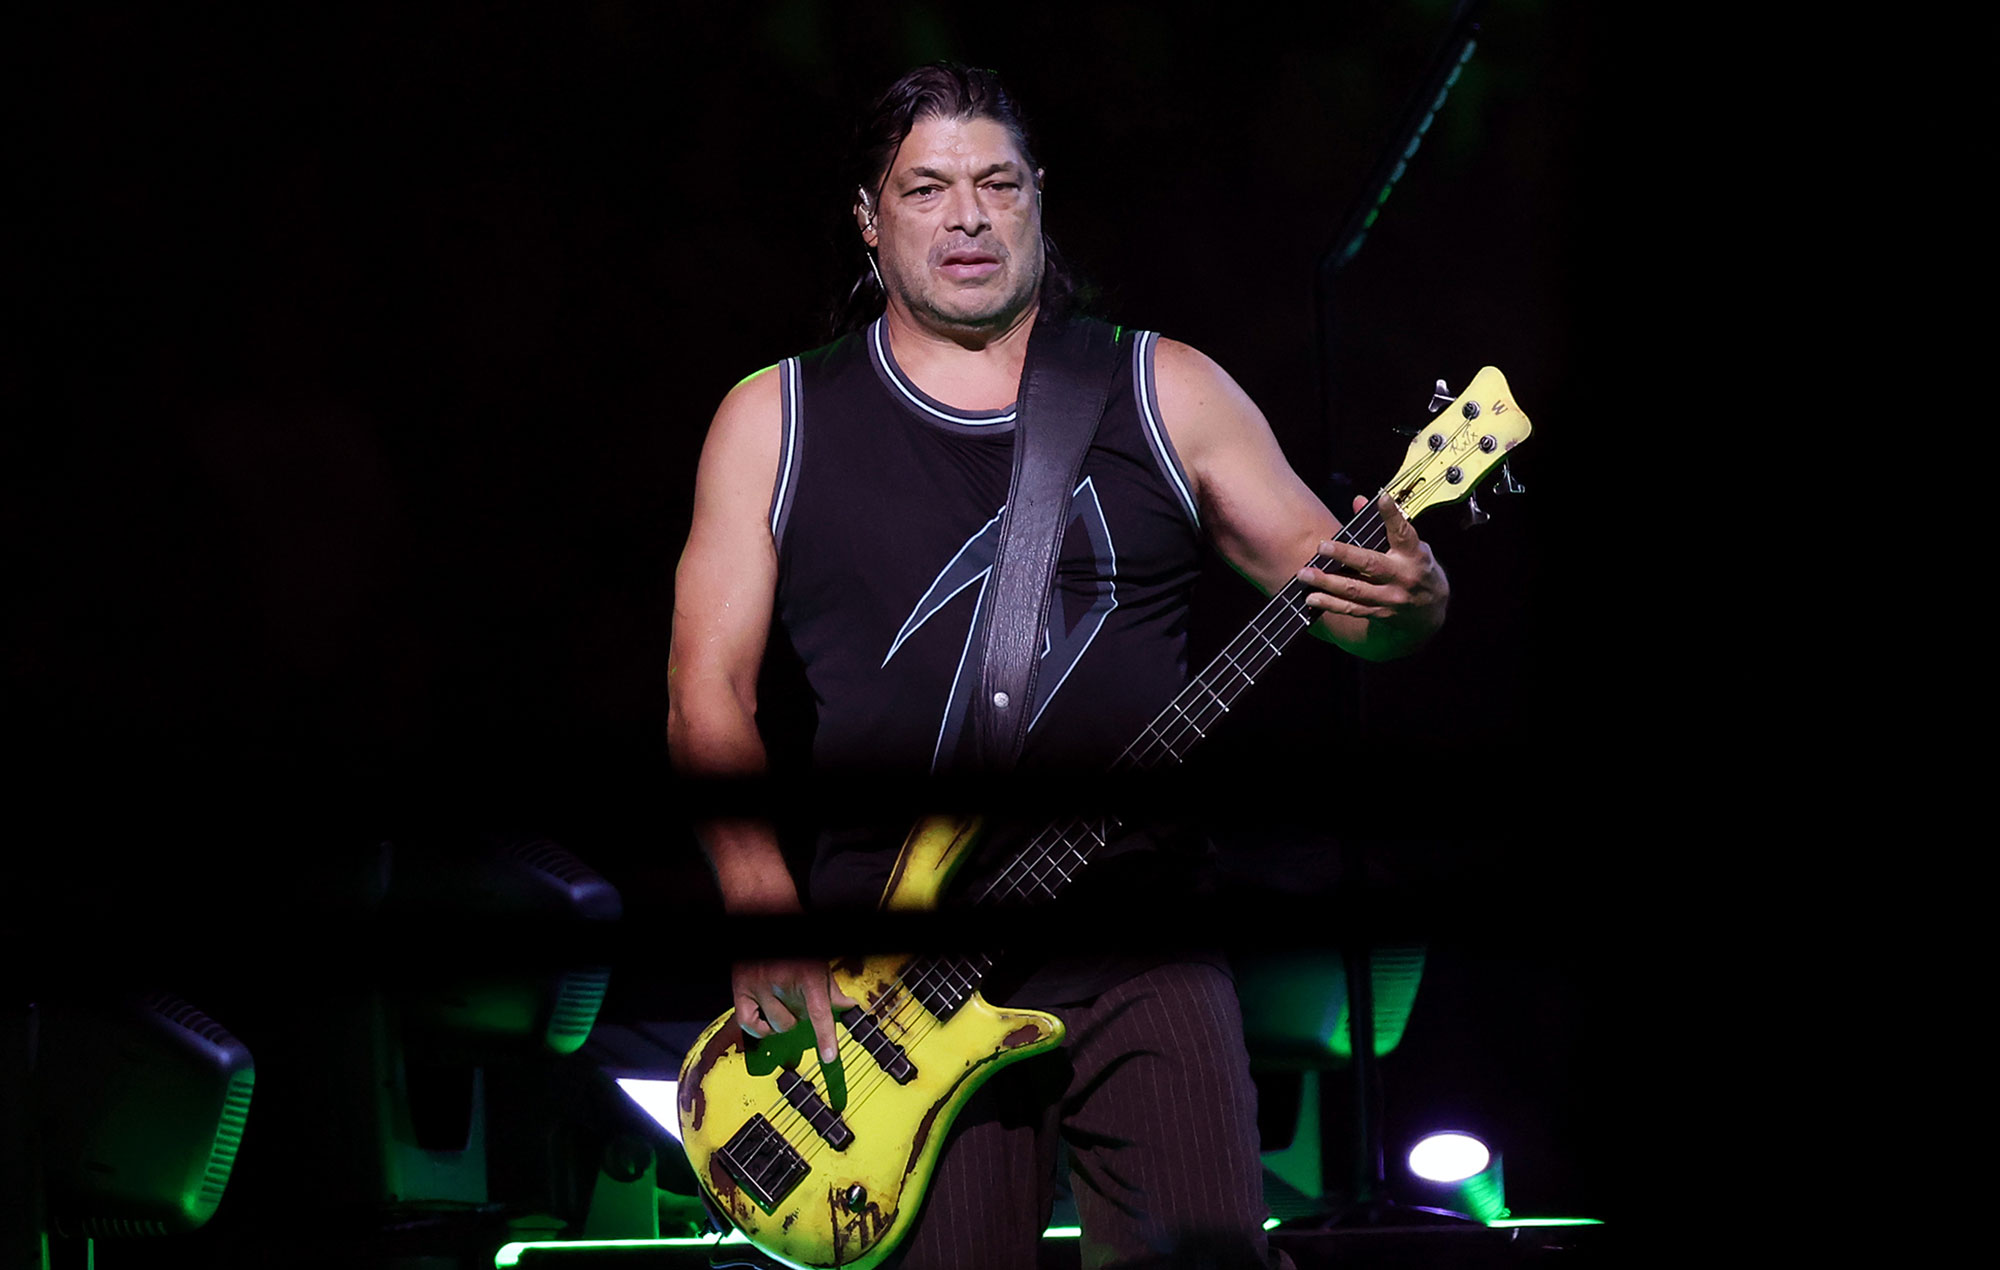 Watch Metallica’s Robert Trujillo fill in for his son at Suicidal Tendencies show